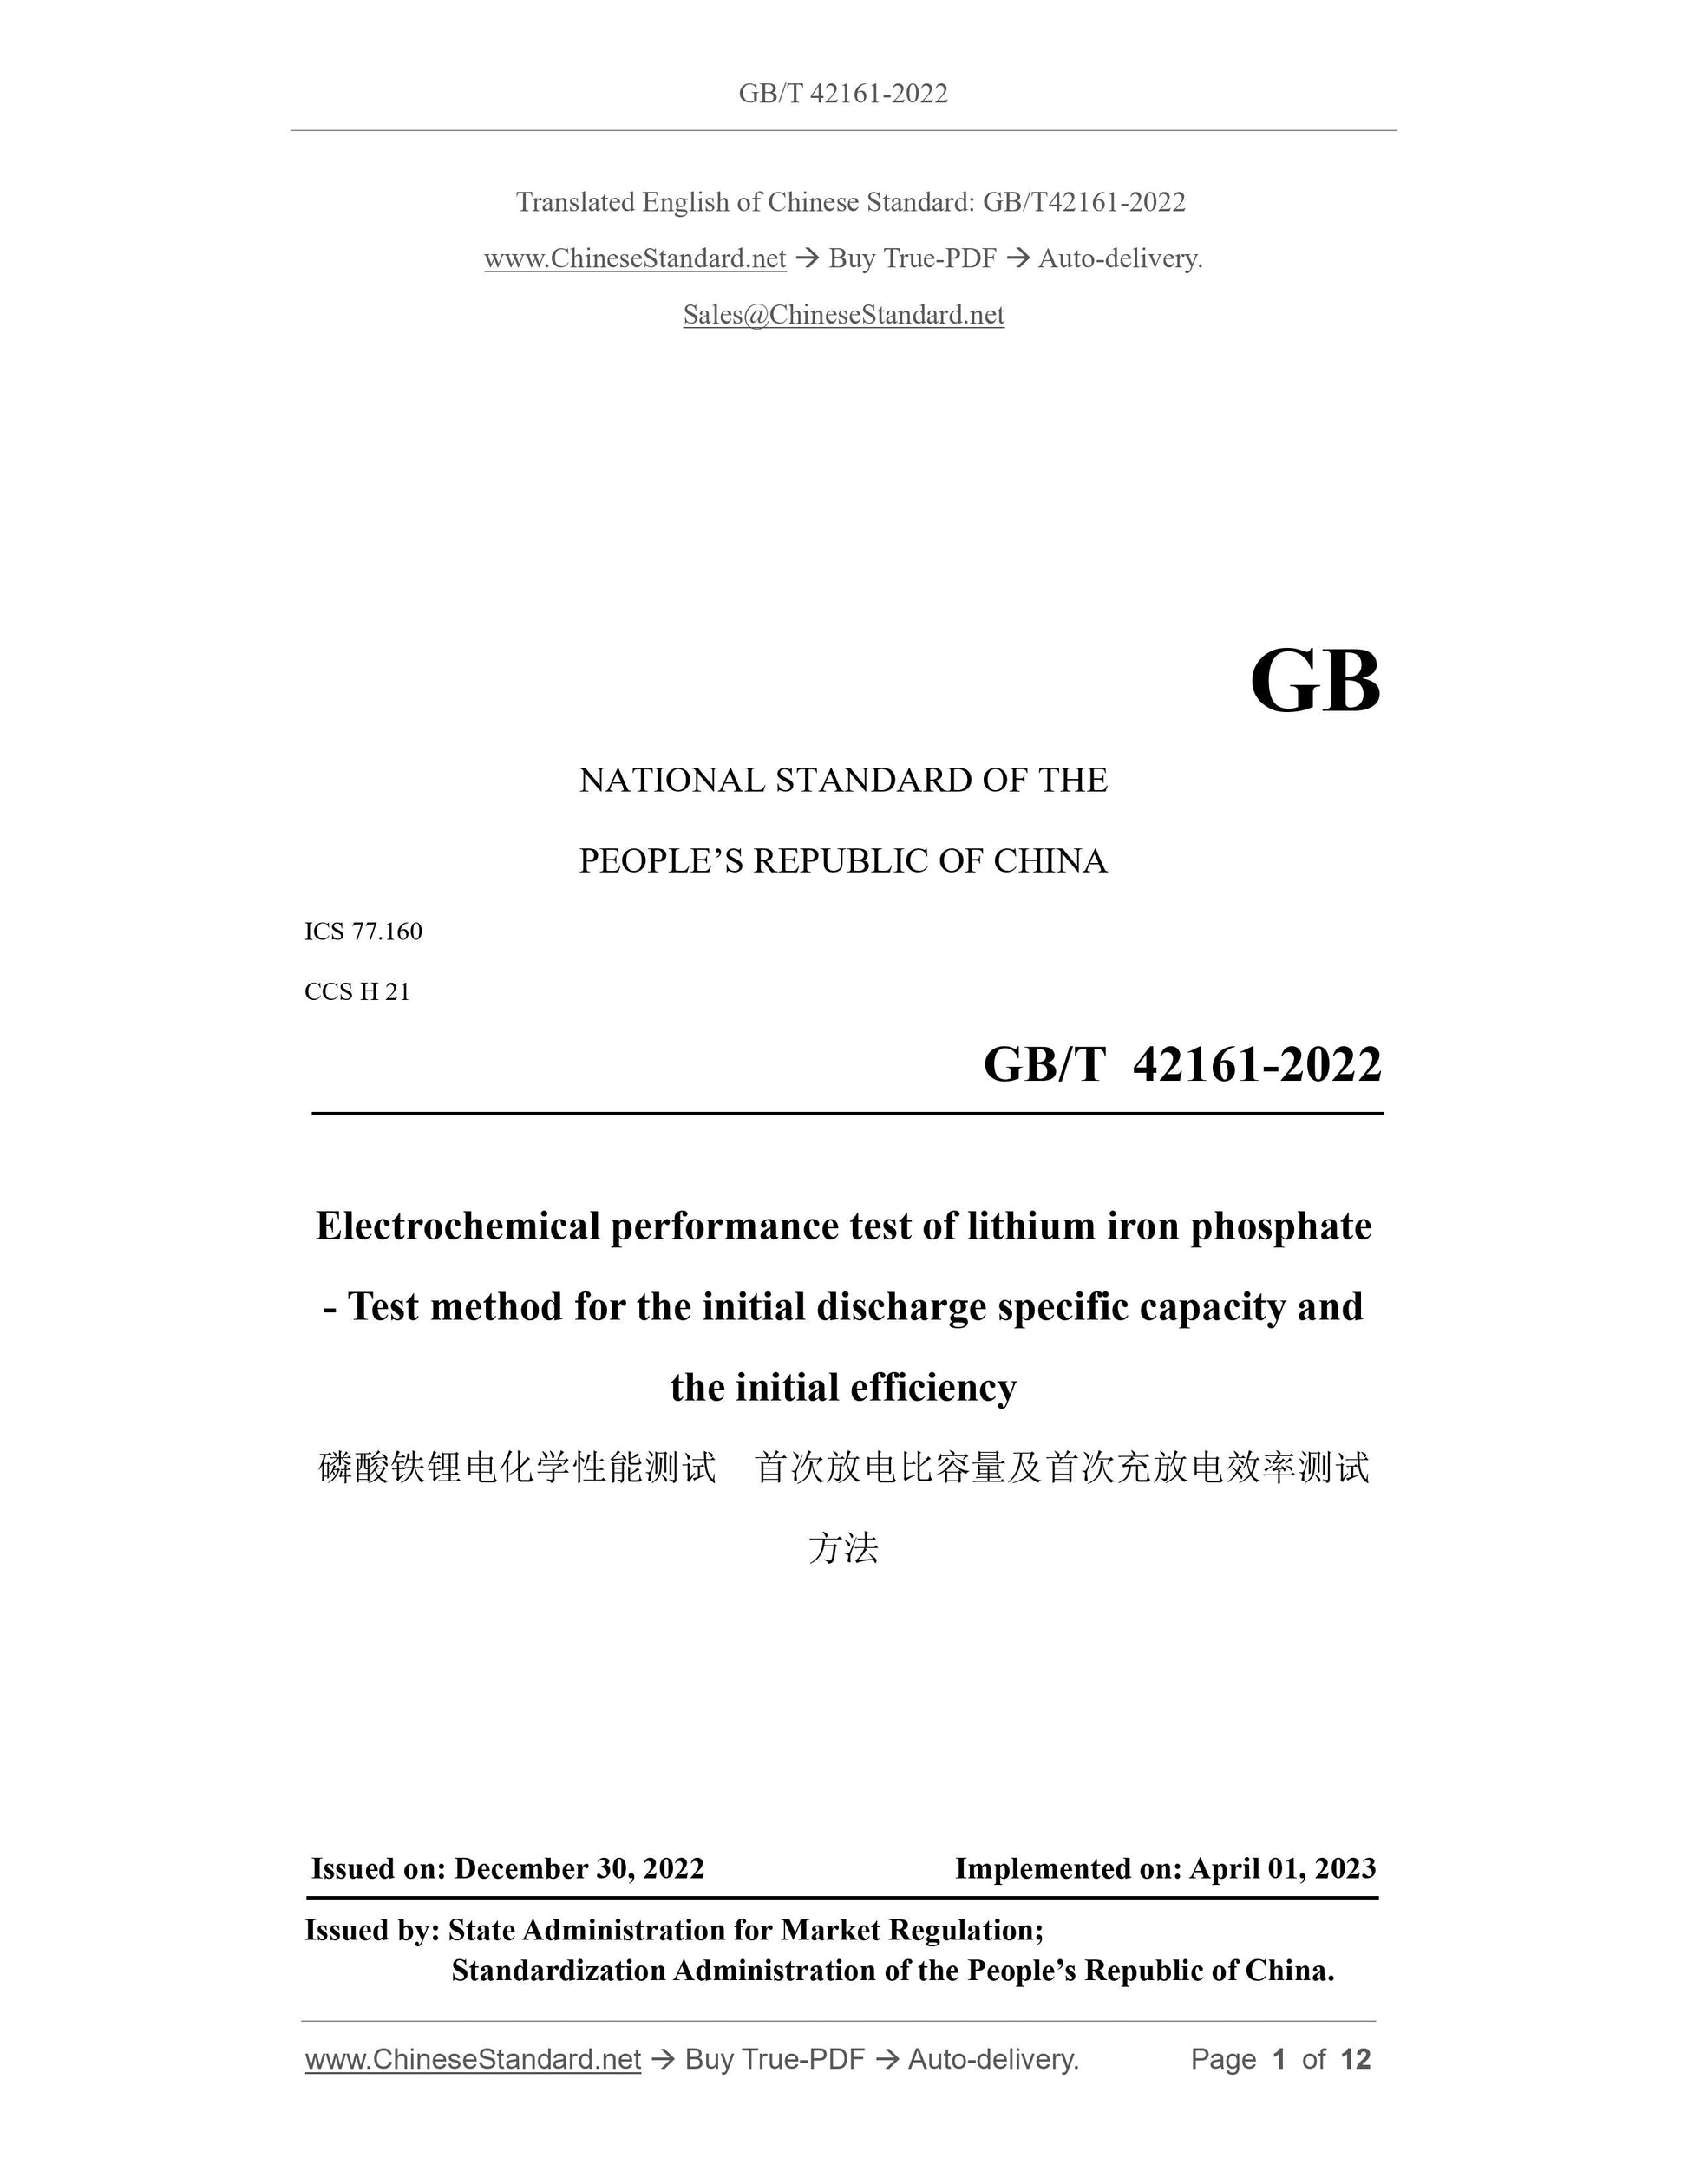 GB/T 42161-2022 Page 1